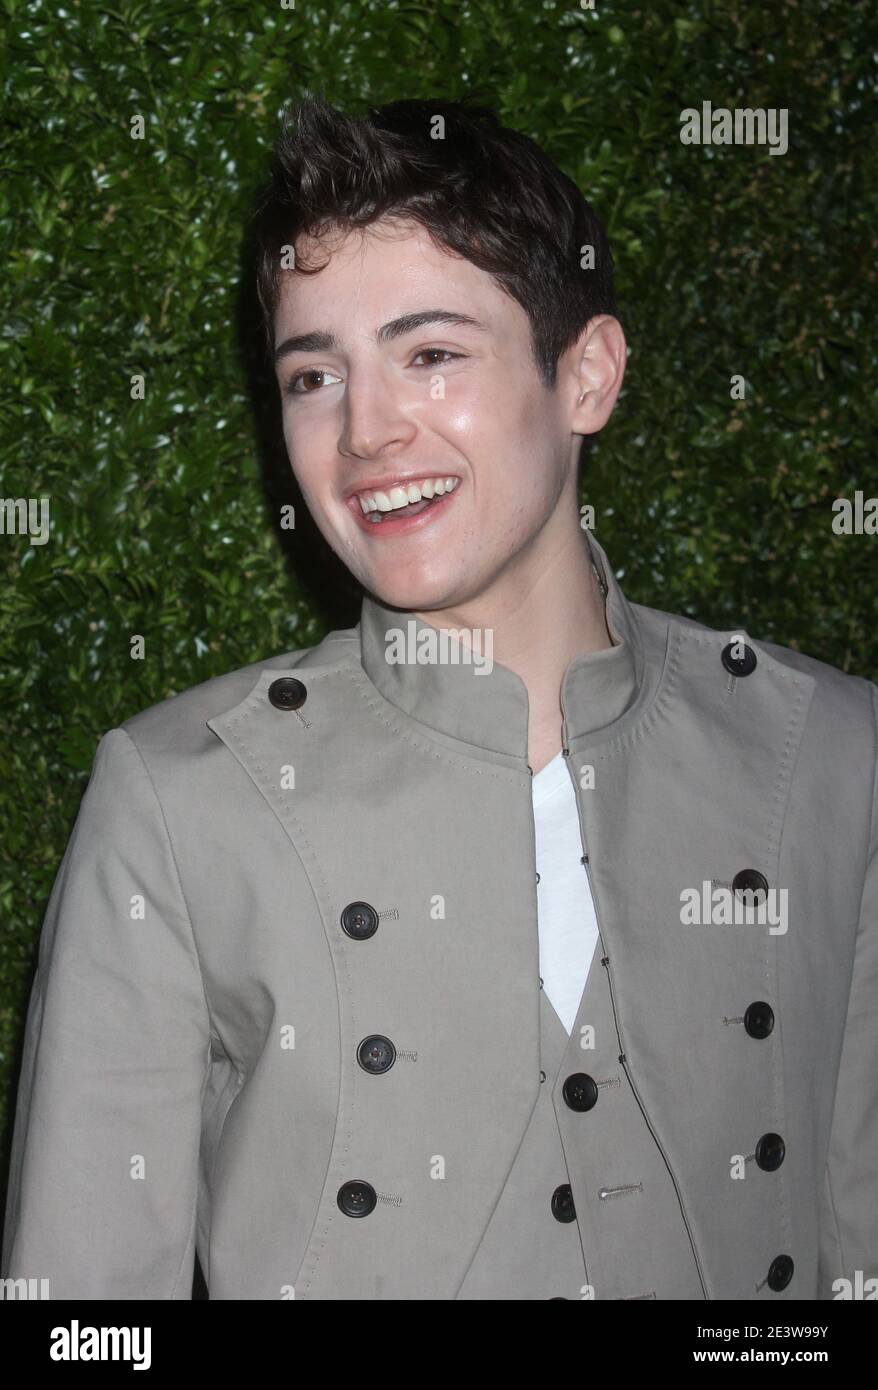 Harry Brant, son of Stephanie Seymour and Peter M. Brant attends a dinner hosted by CHANEL in honor of the 2014 Tribeca Film Festival Artist Program at Balthazar Restaurant in New York City on April 22, 2014.  Photo Credit: Henry McGee/MediaPunch Stock Photo